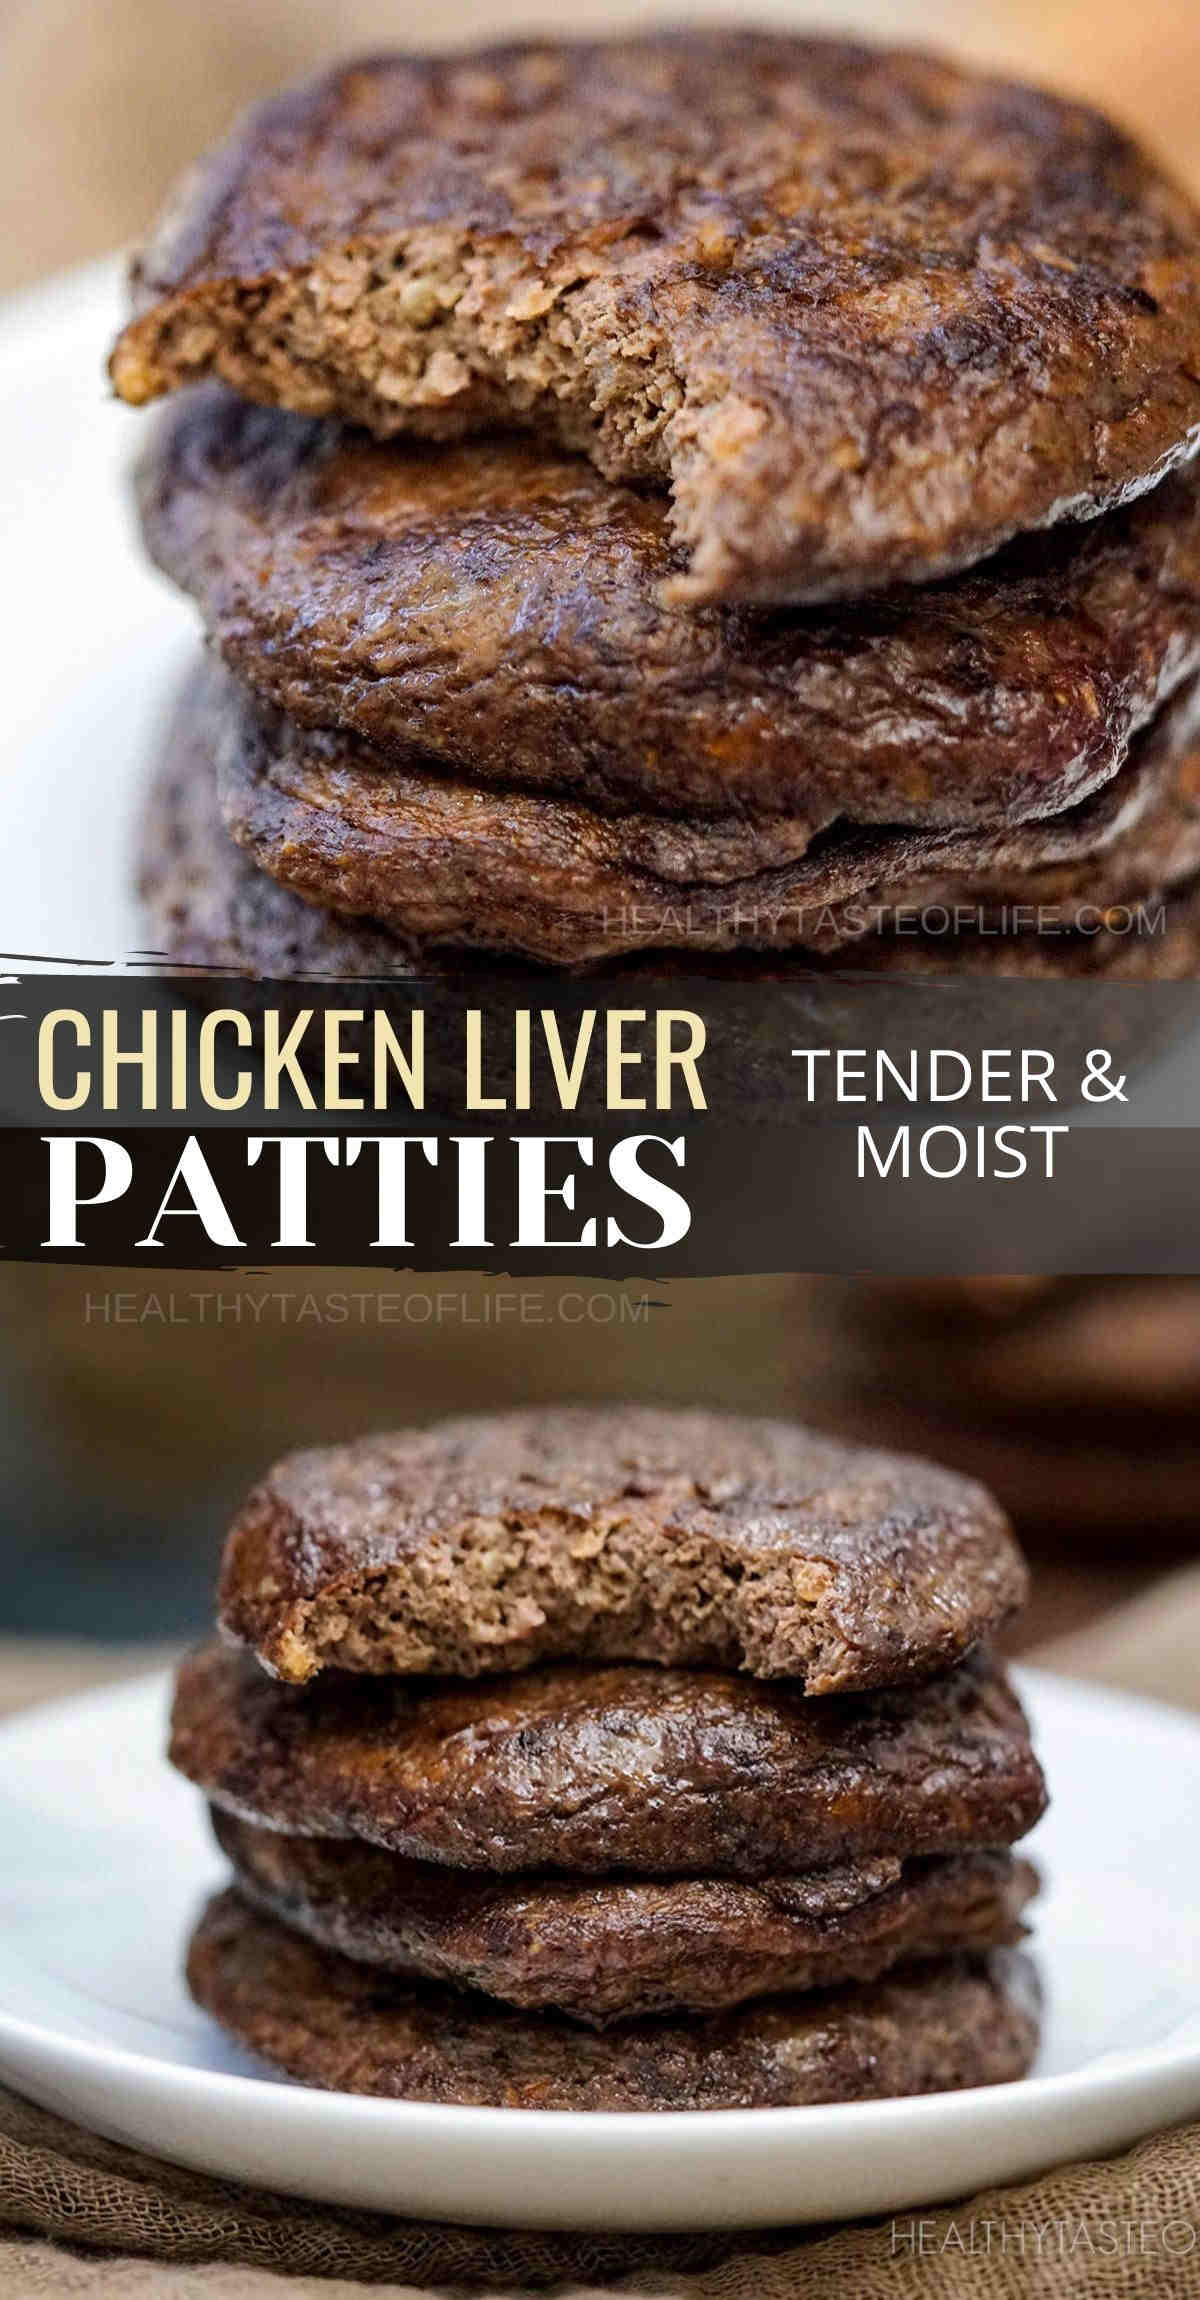 Looking for Chicken livers recipes? Try these chicken liver patties / pancakes, they're prepared similar to regular meat patties. With a smooth and tender texture and a flavor specific for organ meats. Bold, earthy, rich and nutritionally satisfying chicken liver patties. If you love the Chicken Liver Paté, then you’ll love this chicken liver recipe as well! #chickenliverpatties #chickenliverpancakes #chickenliverrecipe #chickenlivers #meatpatties